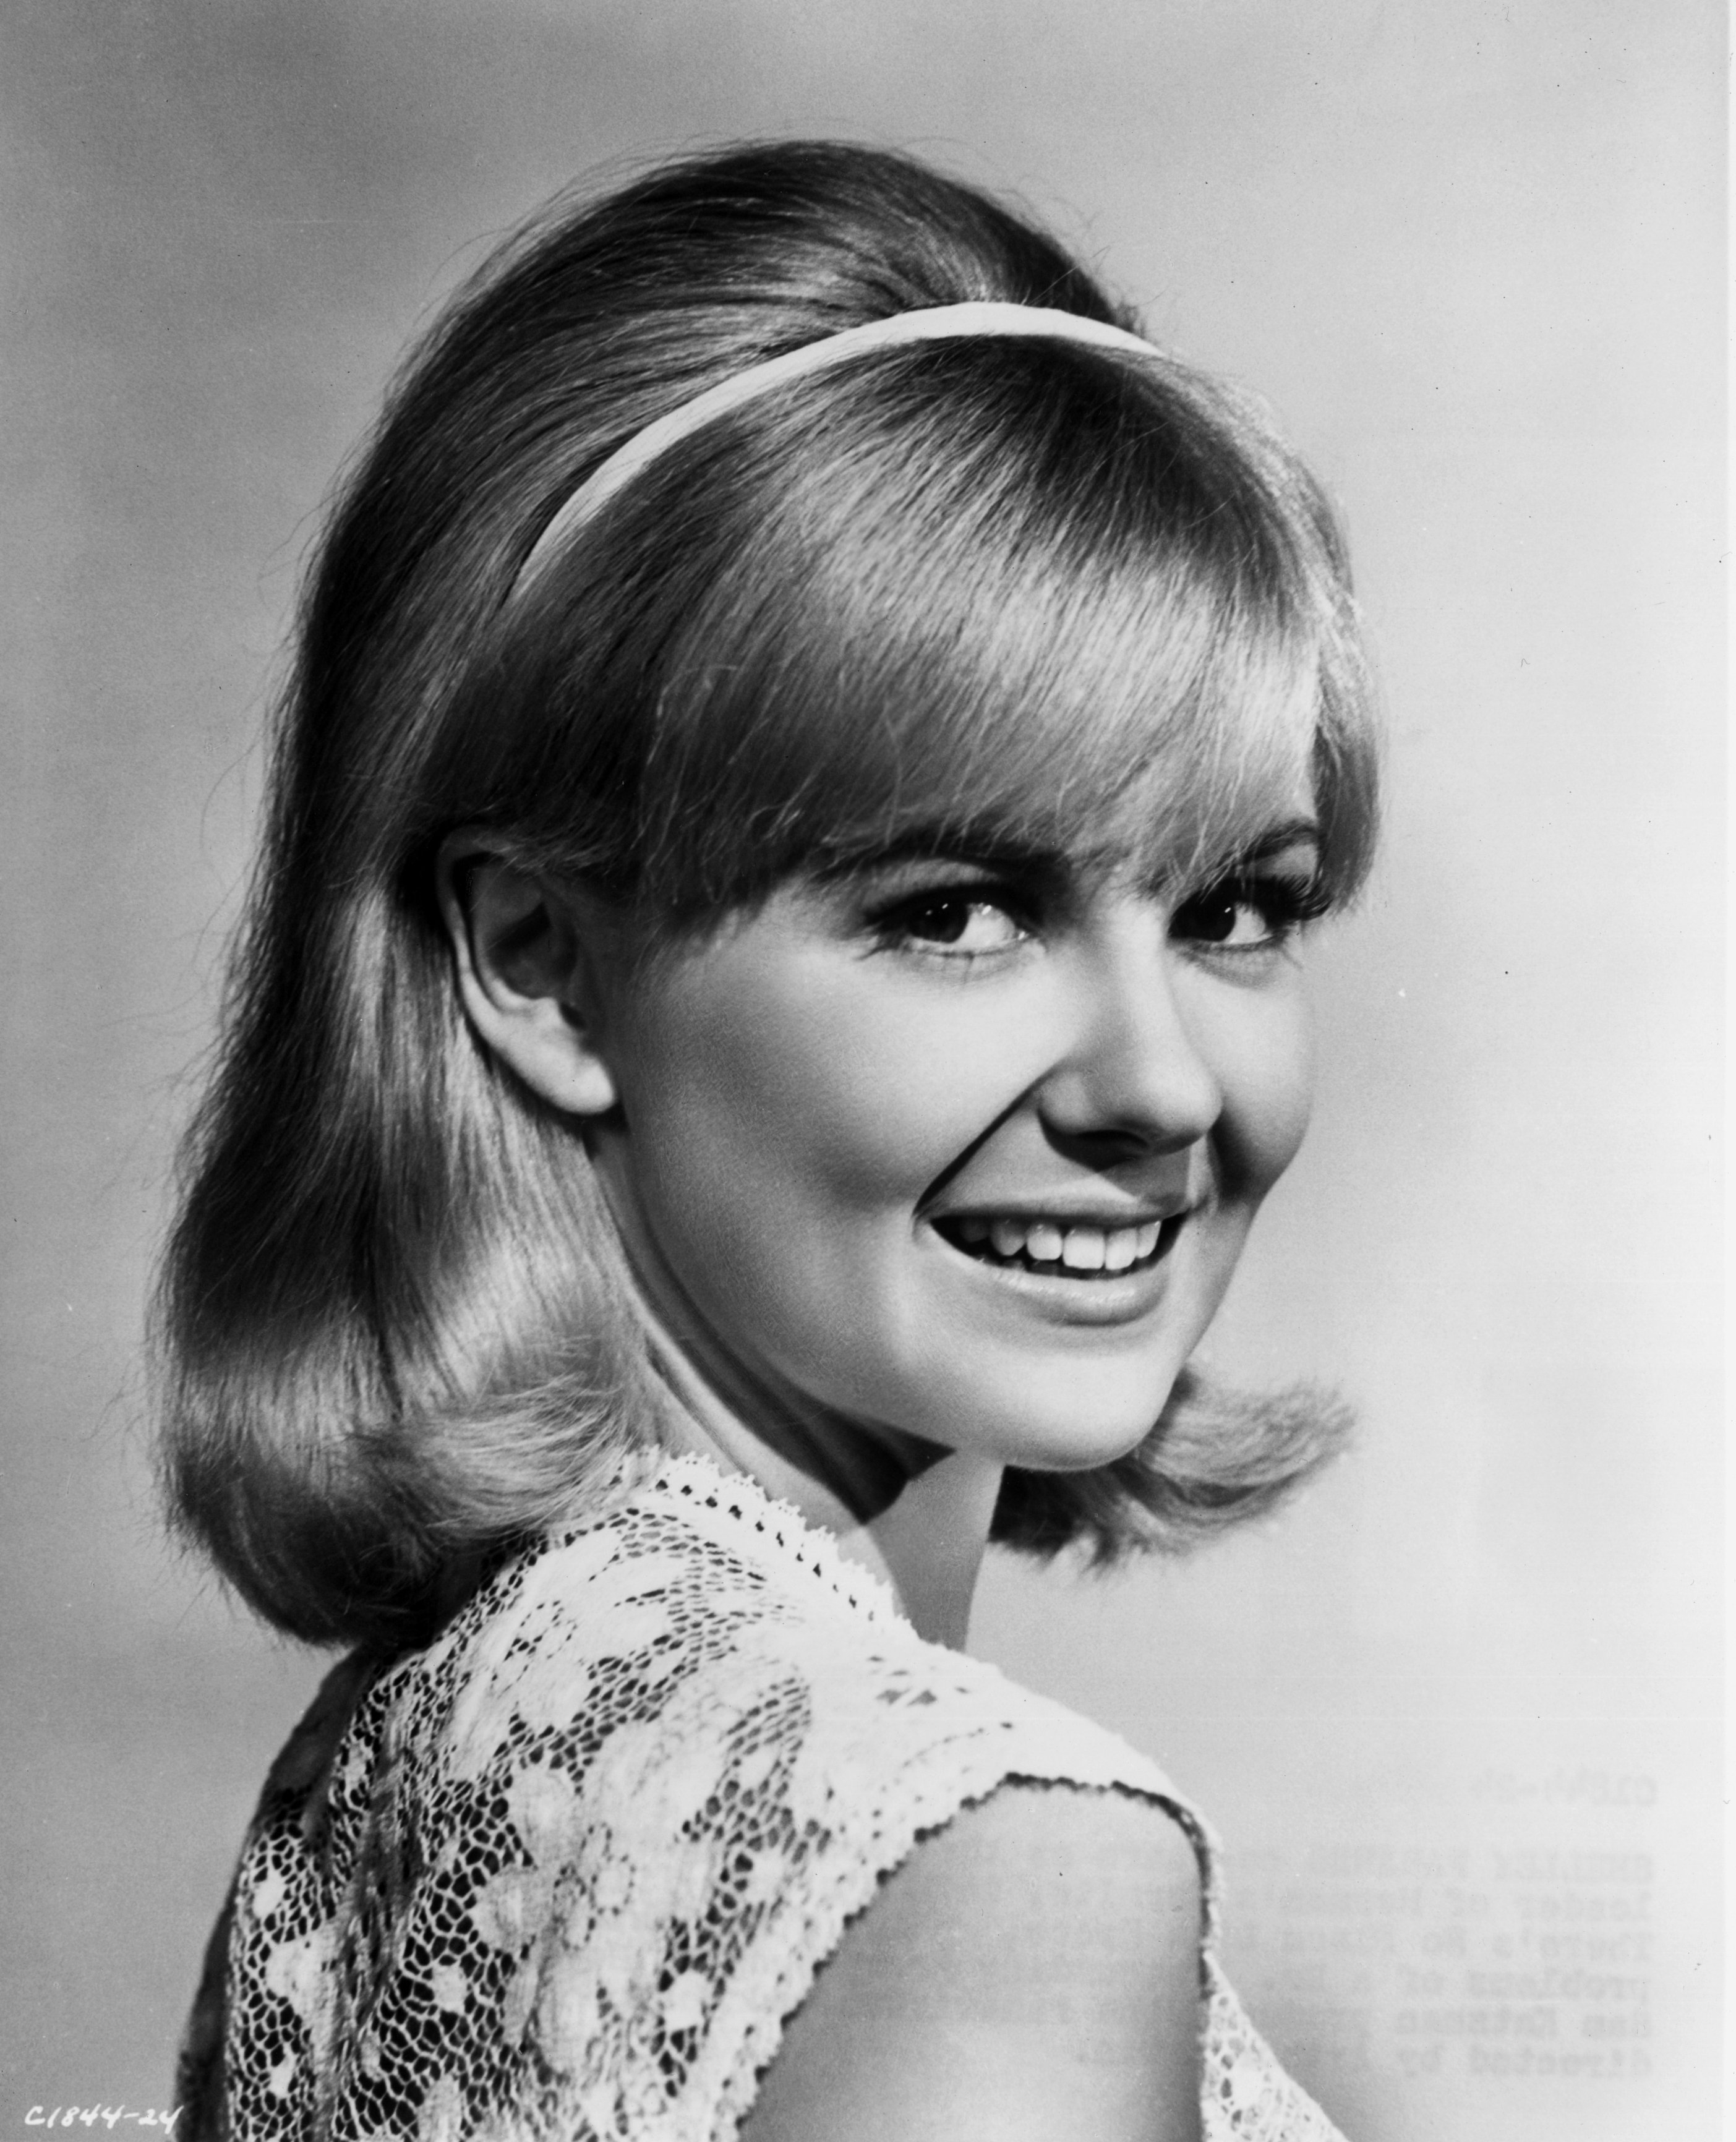 Promotional portrait of Shelley Fabares for the movie "Hold On!" circa 1966 | Source: Getty Images